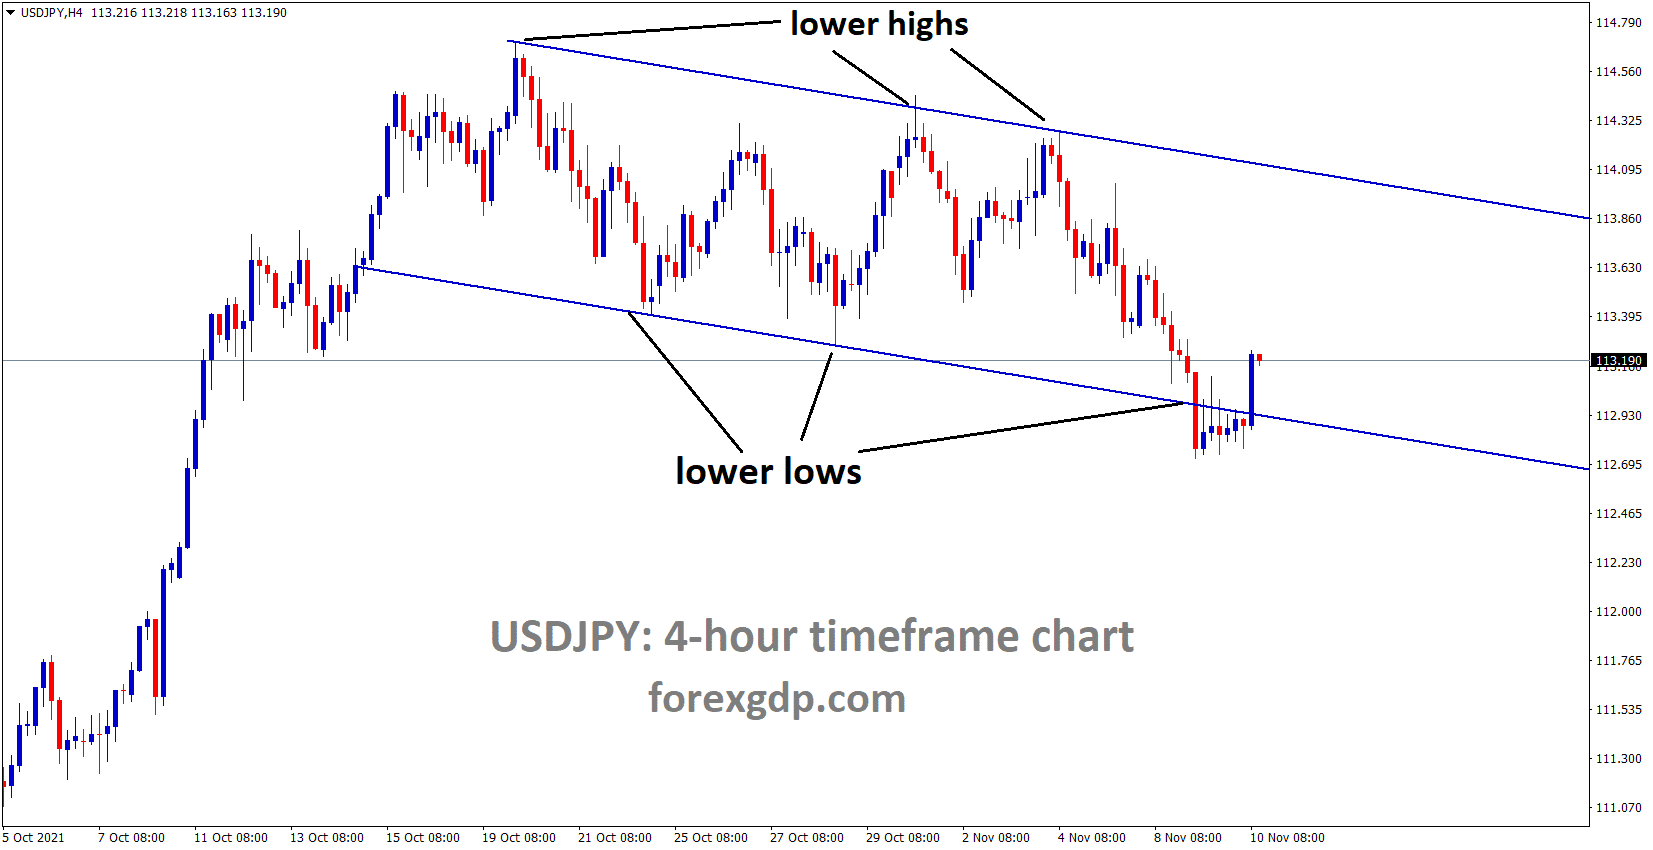 USDJPY is moving in the Descending channel and the market is rebounded from the lower low area